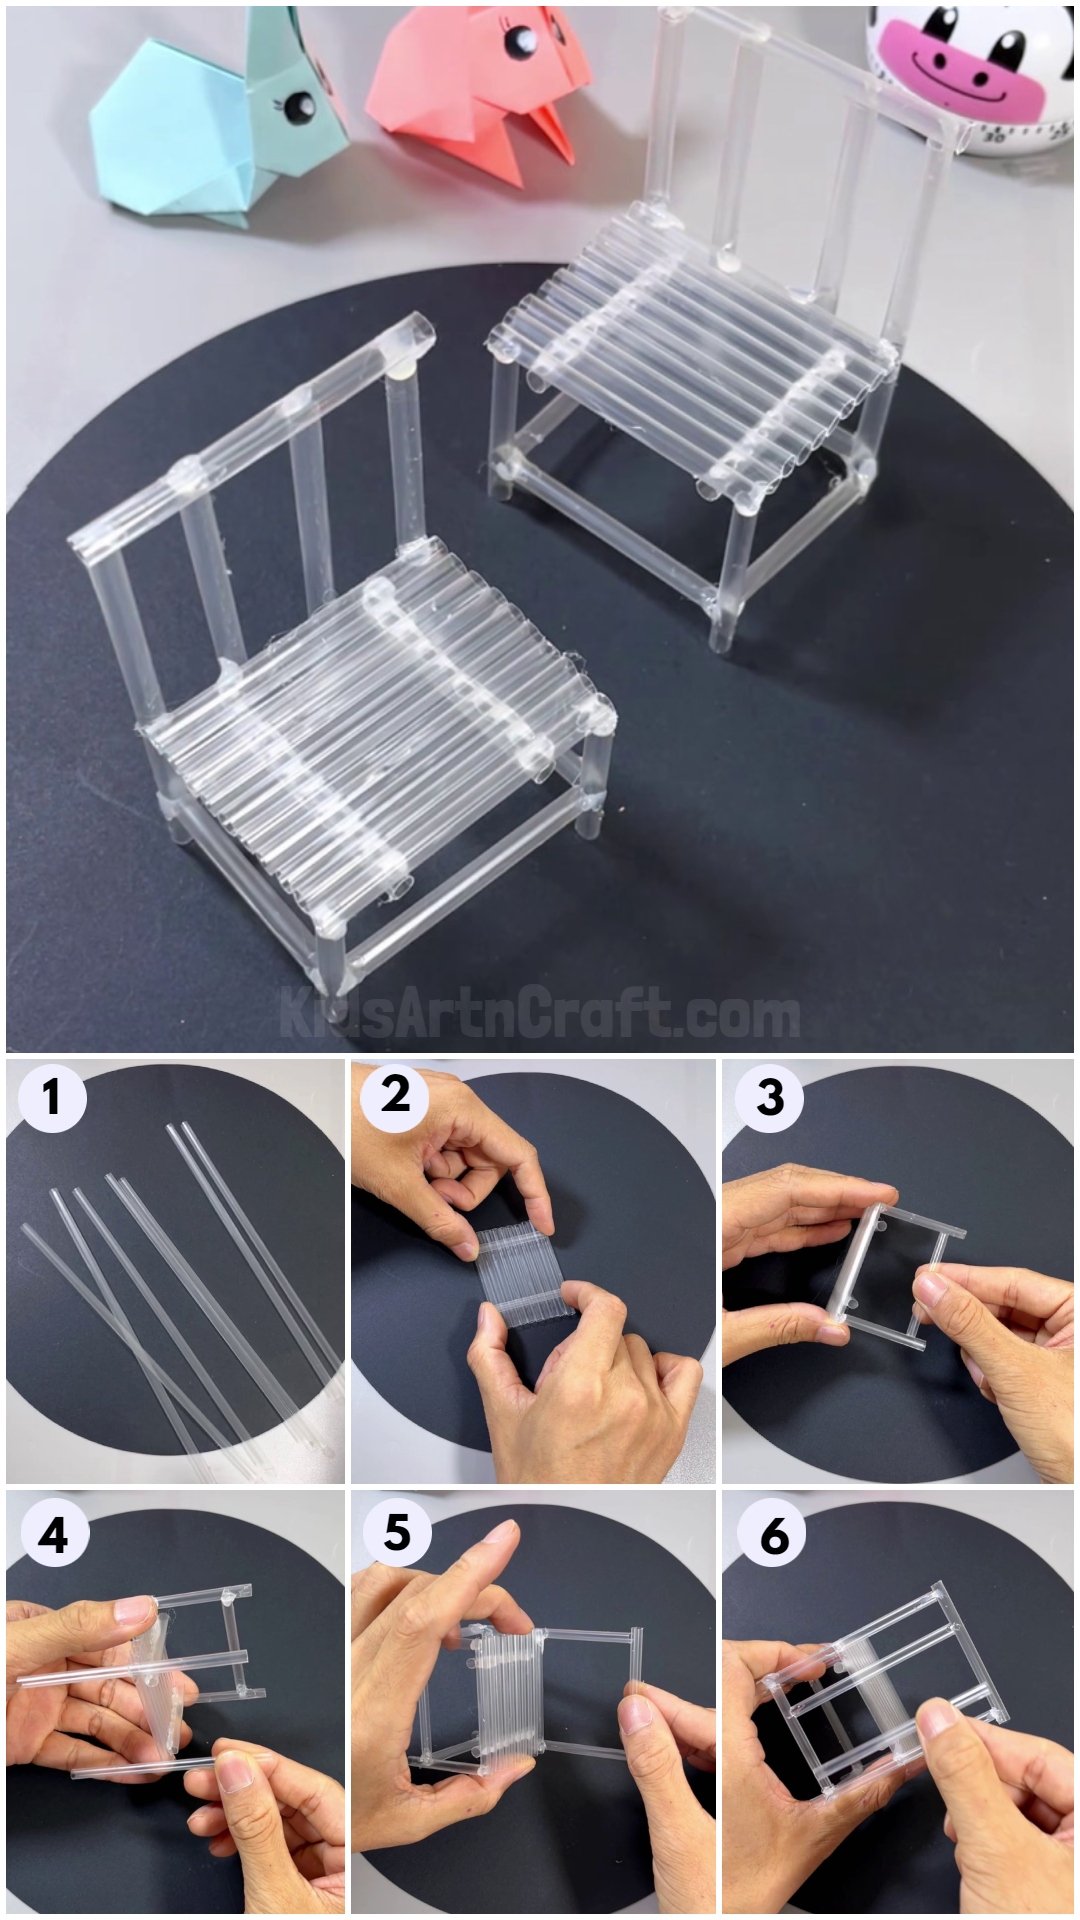 Miniature Chair and Table Using Drinking Straws